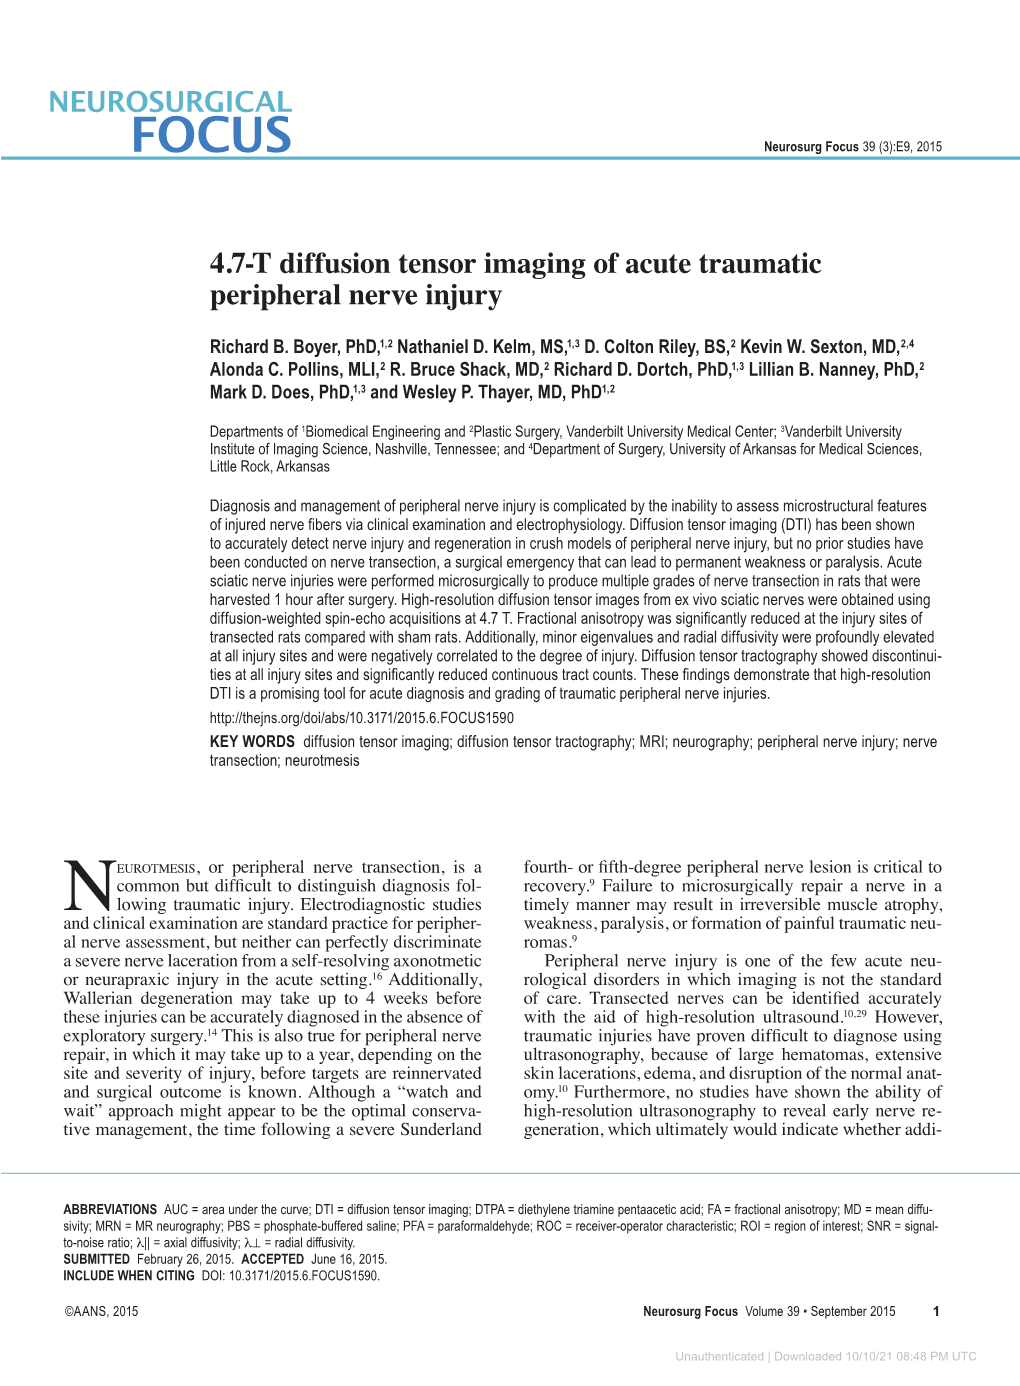 4.7-T Diffusion Tensor Imaging of Acute Traumatic Peripheral Nerve Injury